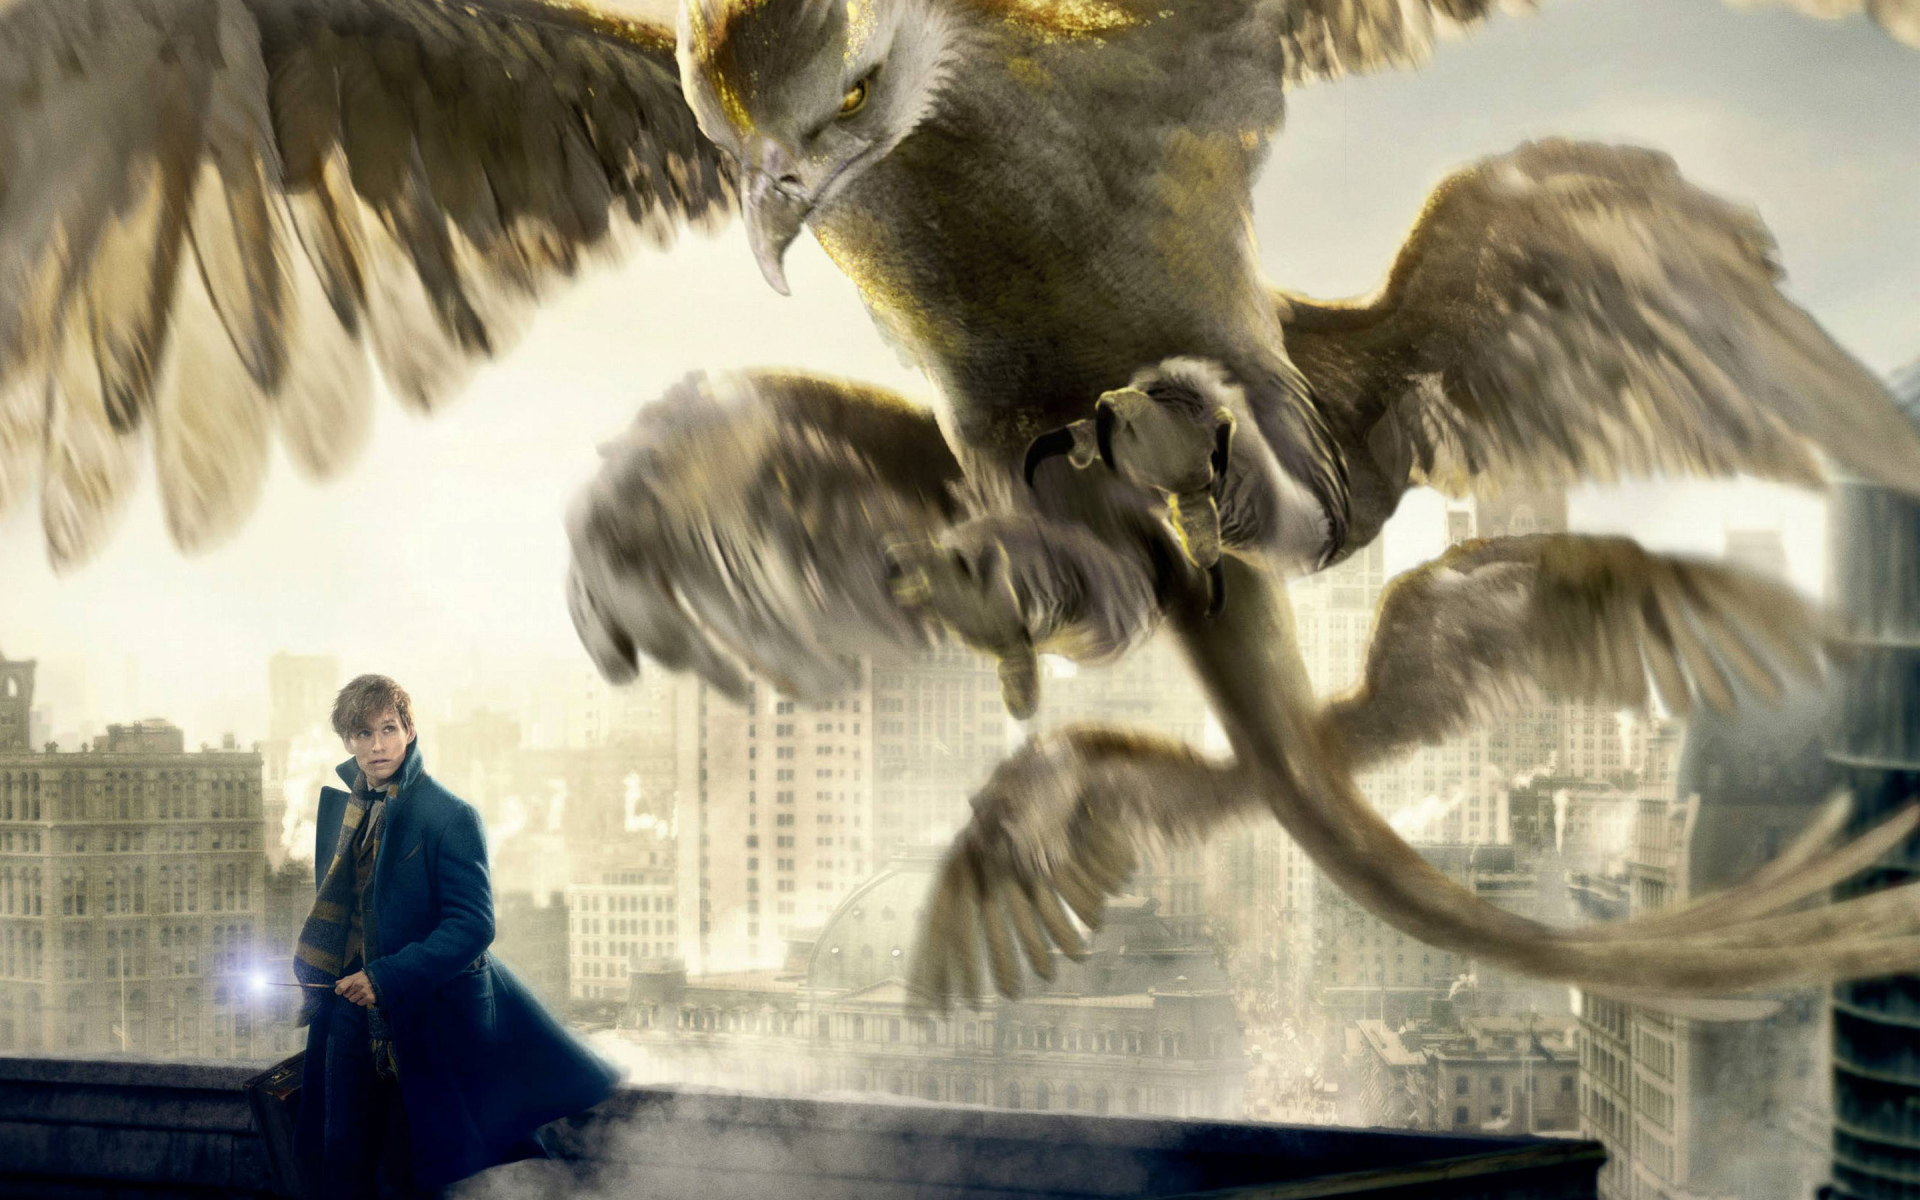 download wallpaper: Fantastic beasts and where to find them wallpaper